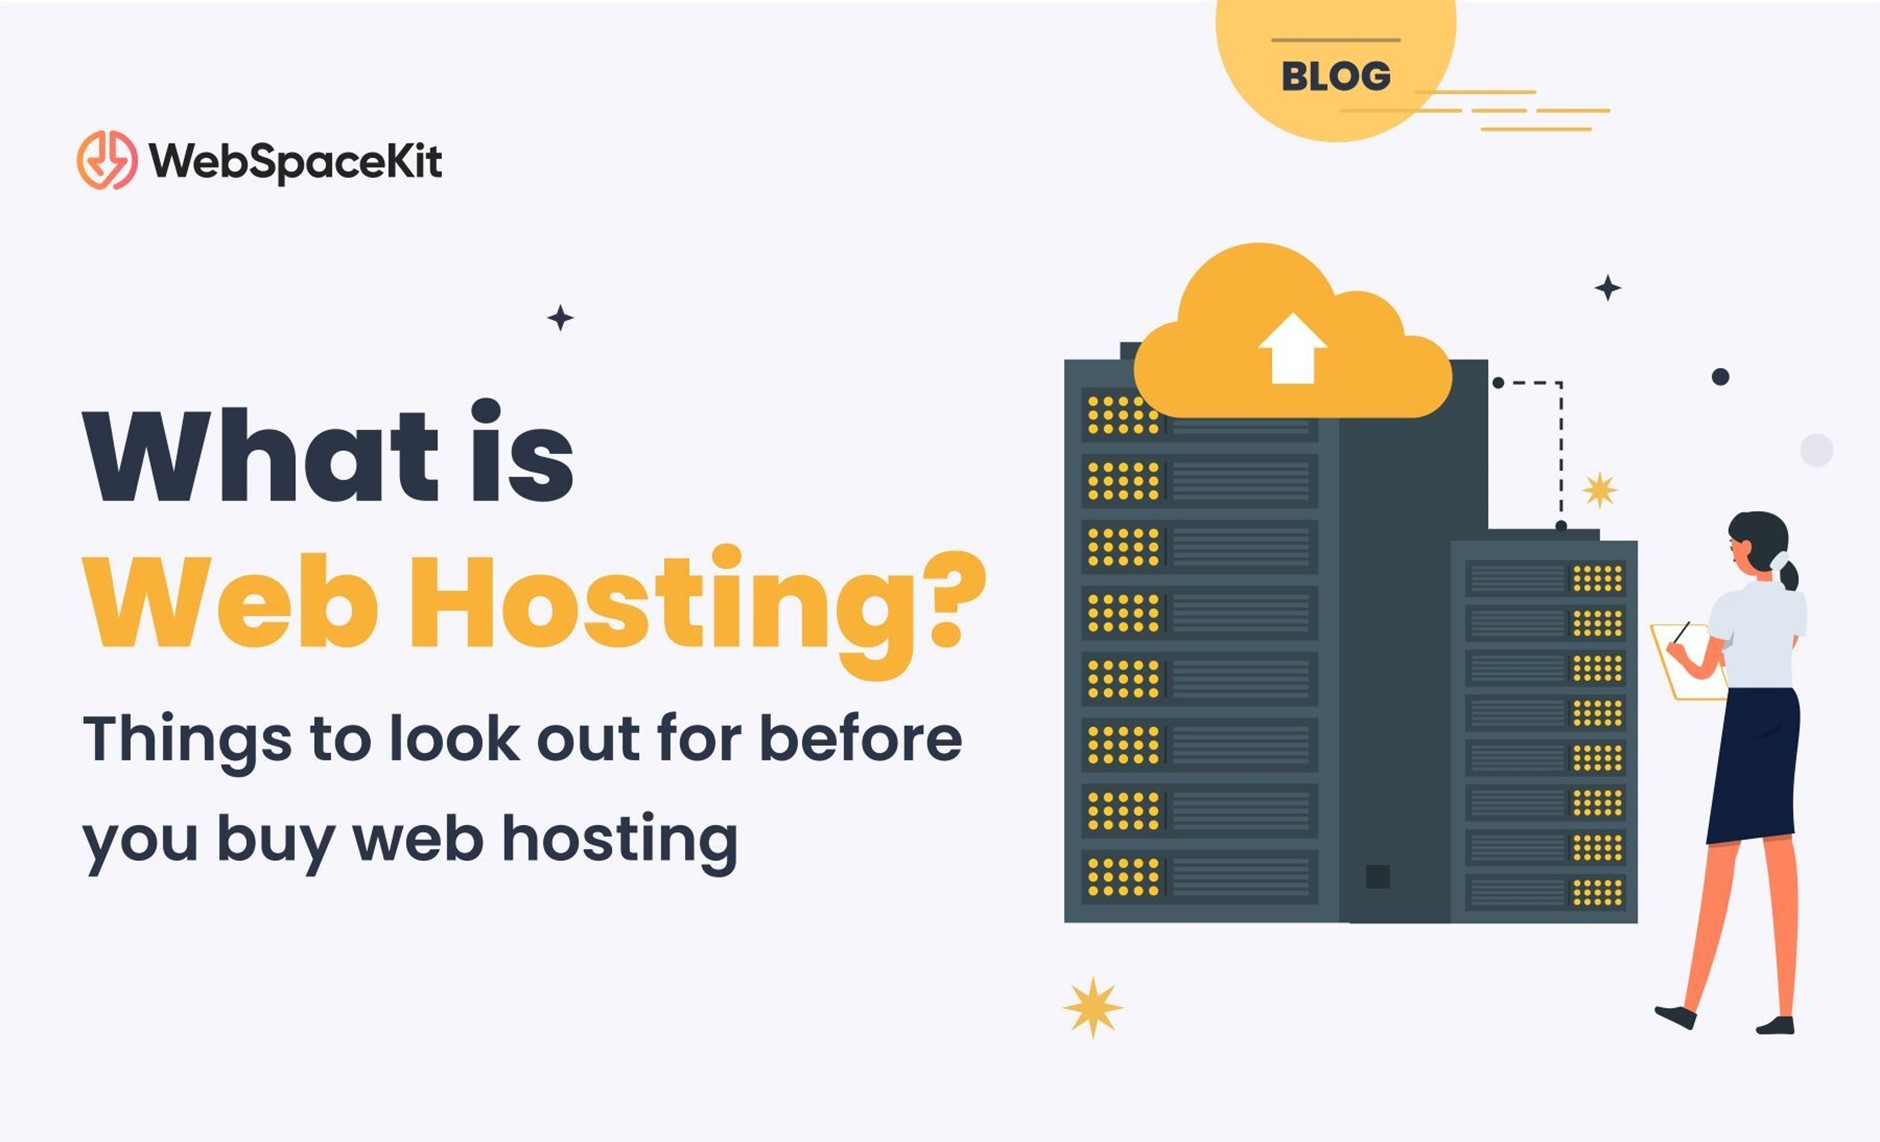 What is Website Hosting? and thingd to look out for before choosing a web host